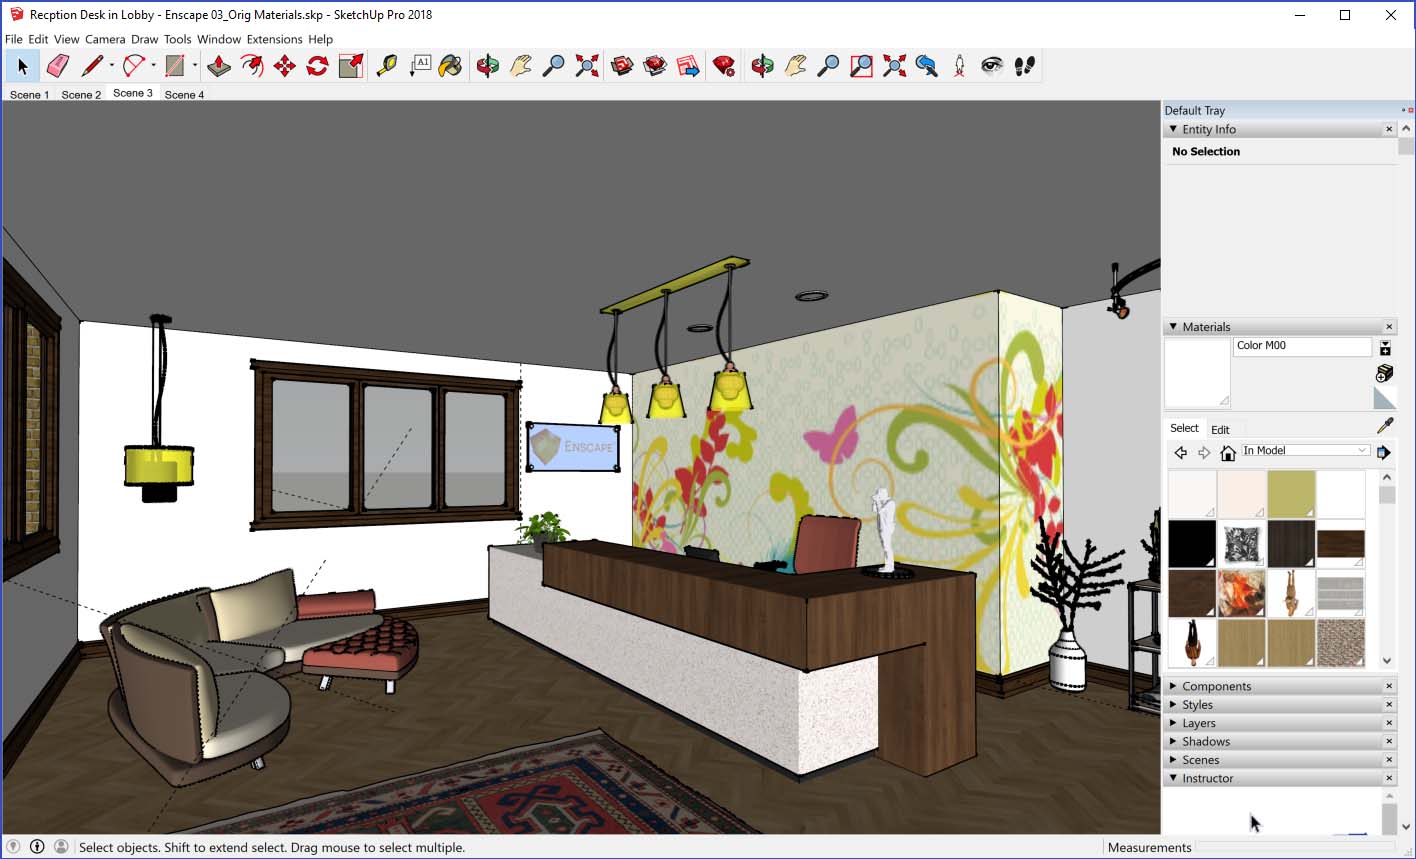 SketchUp model used for this post